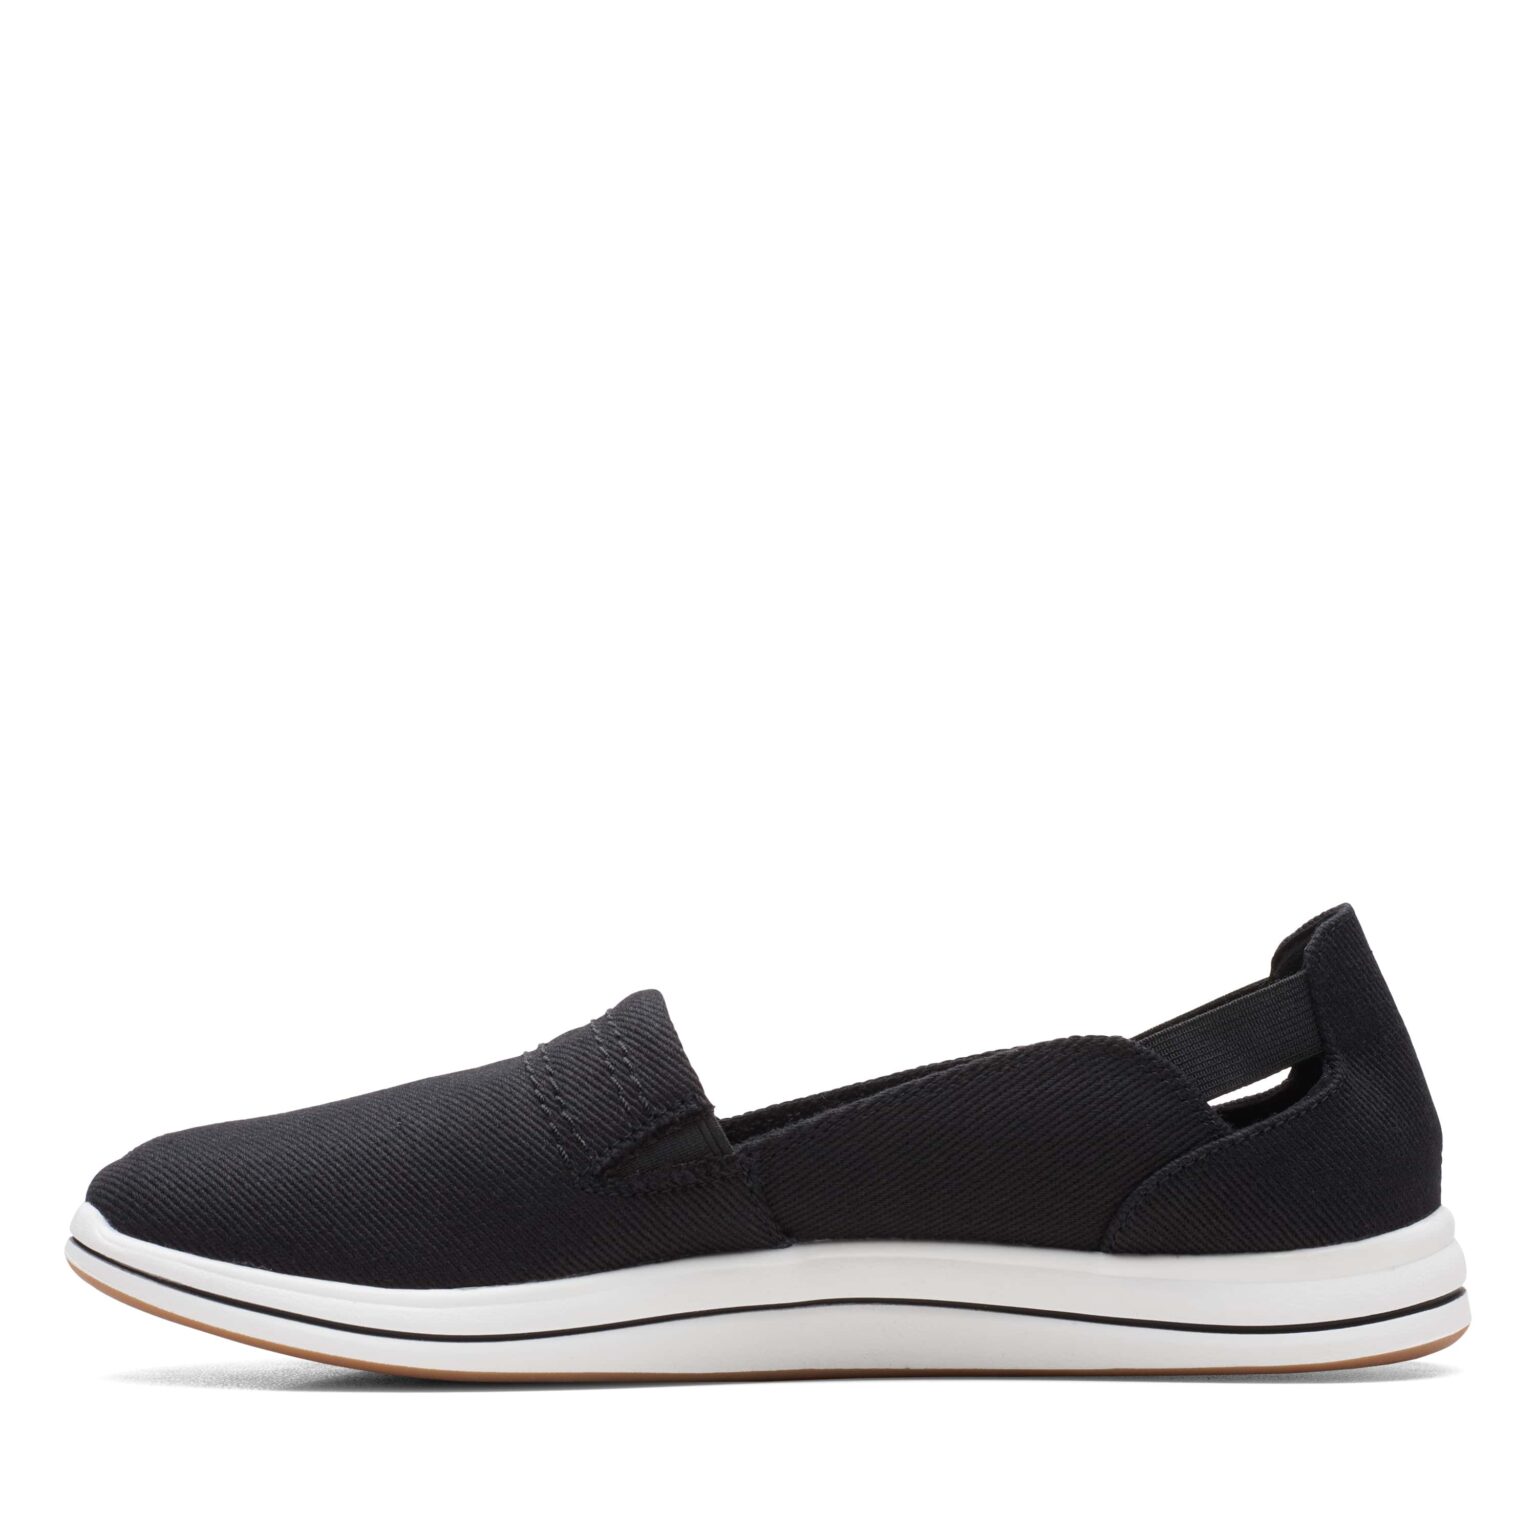 Women's Clarks Breeze Step - Black | Stan's Fit For Your Feet